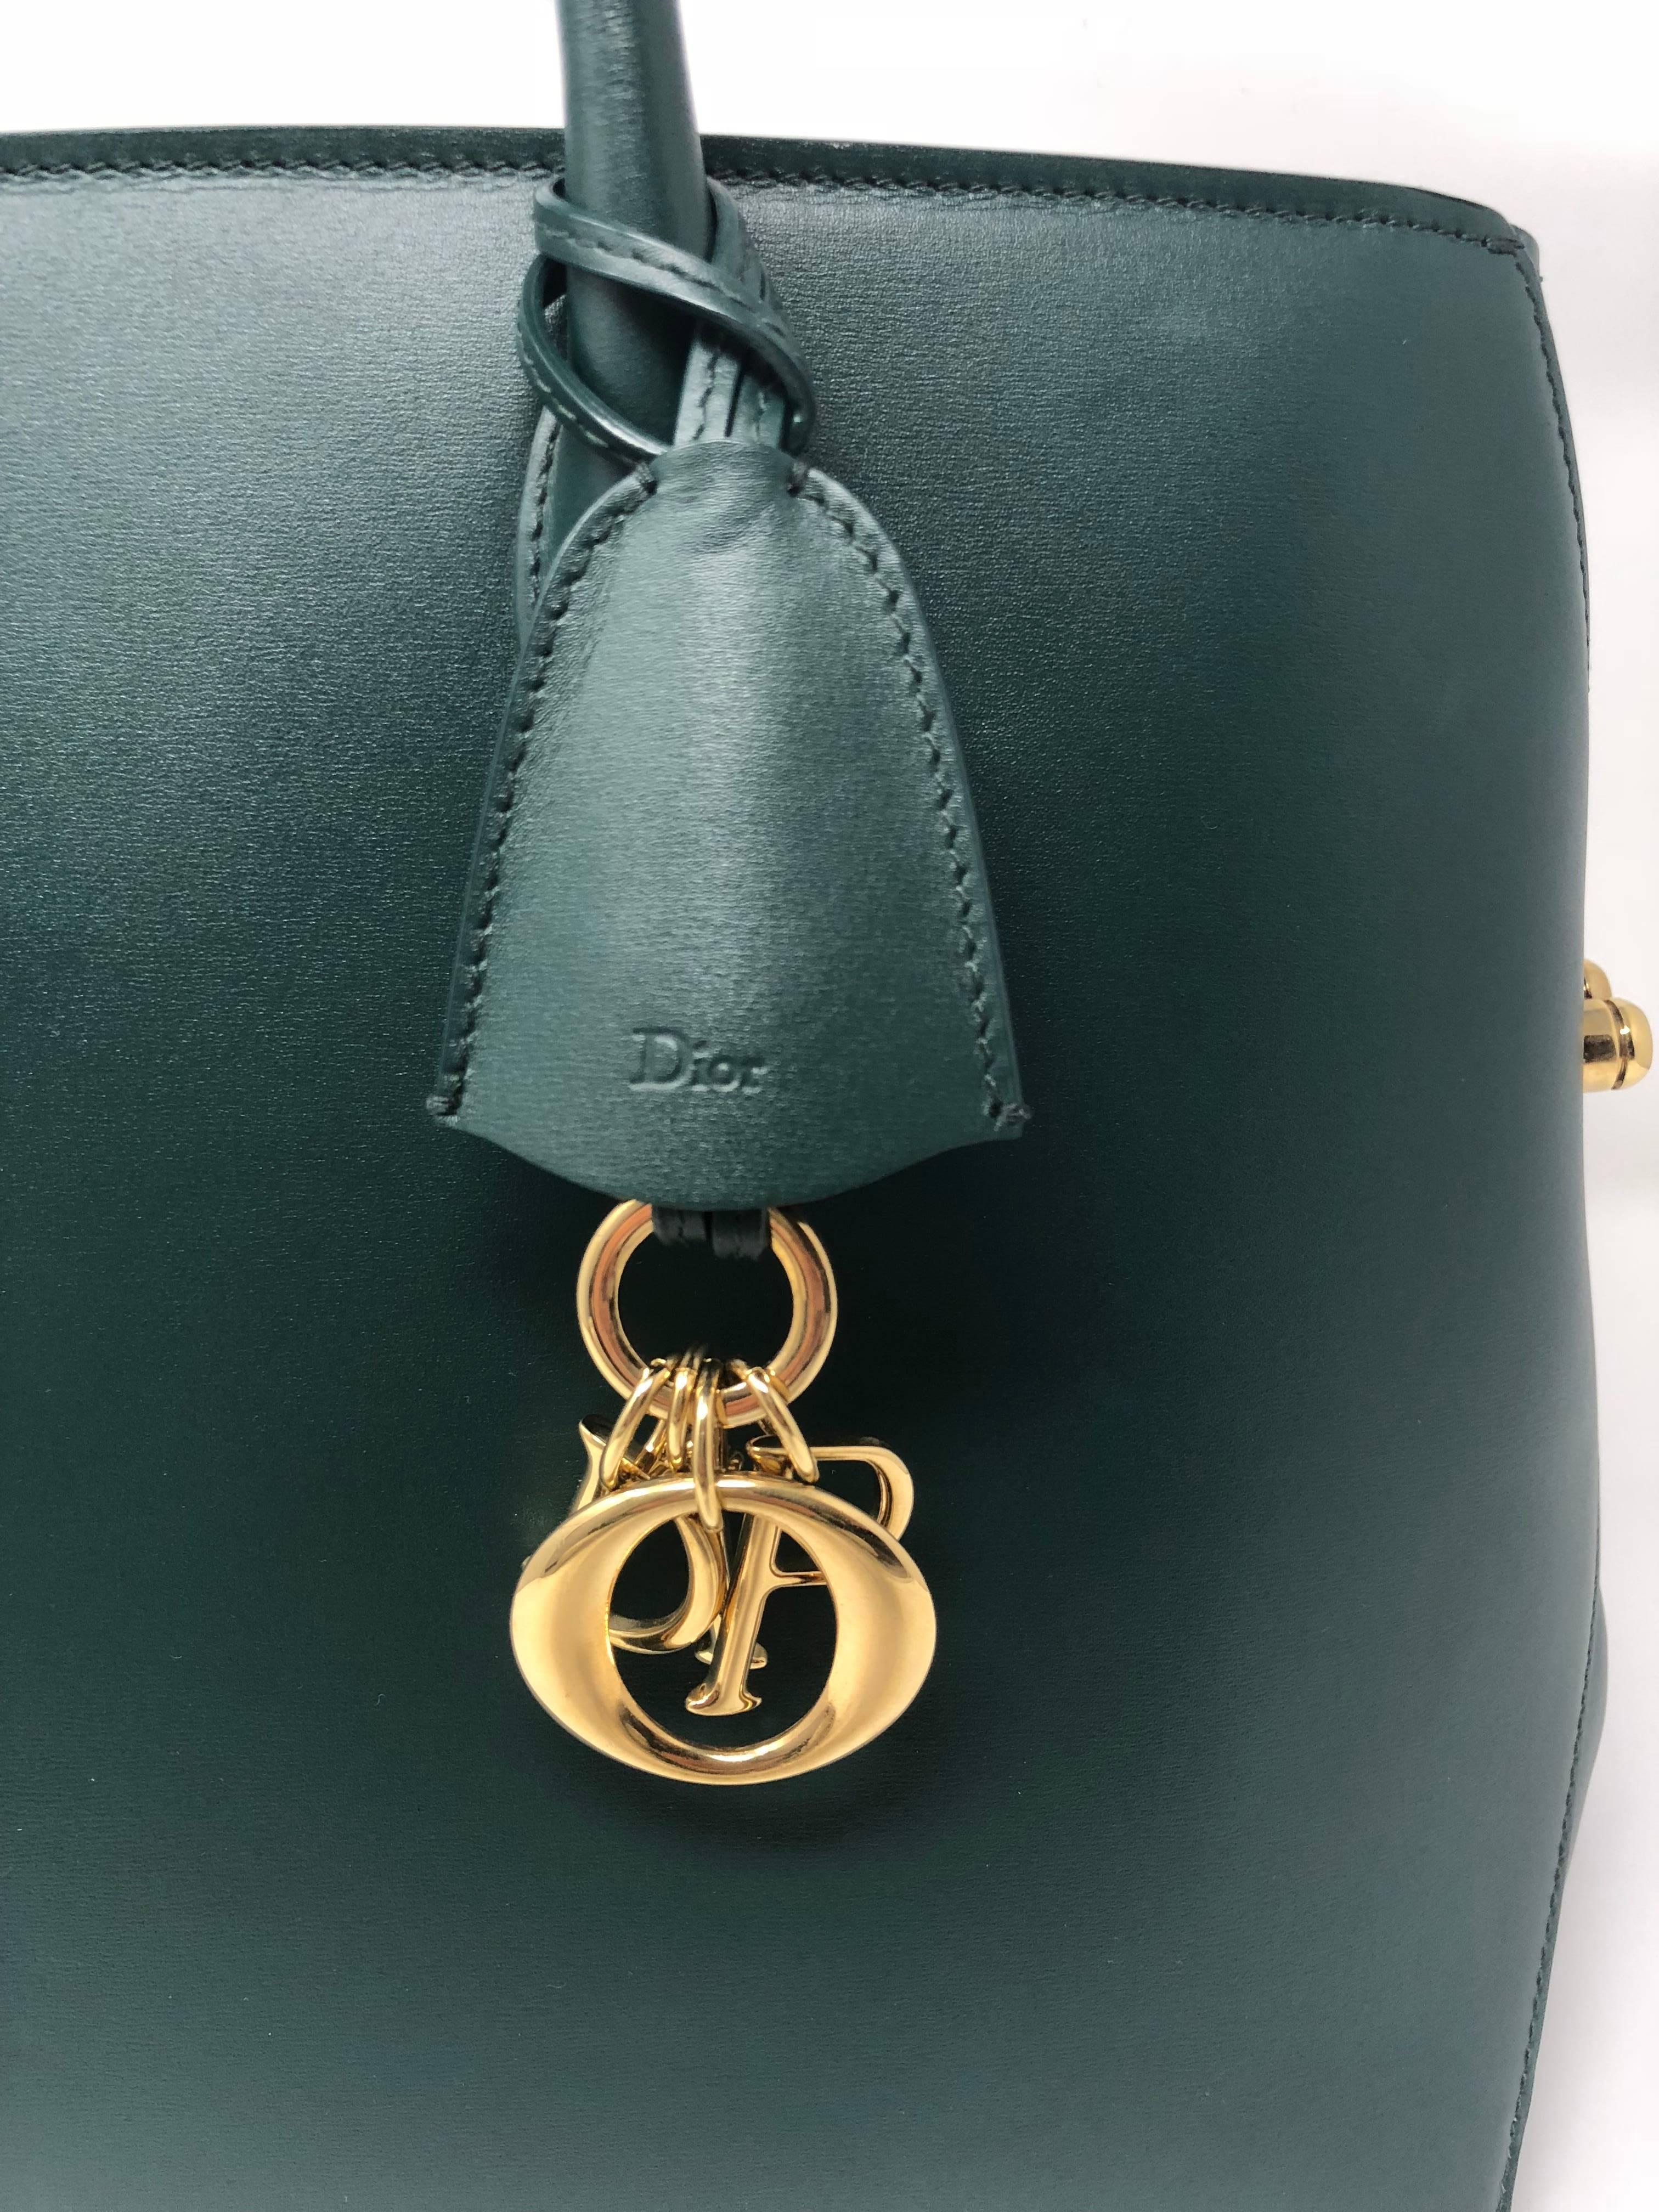 Christian Dior Green Open Bar Tote Bag with gold hardware. Small pen mark in the front near the left side of the handle. Otherwise in great condition. 